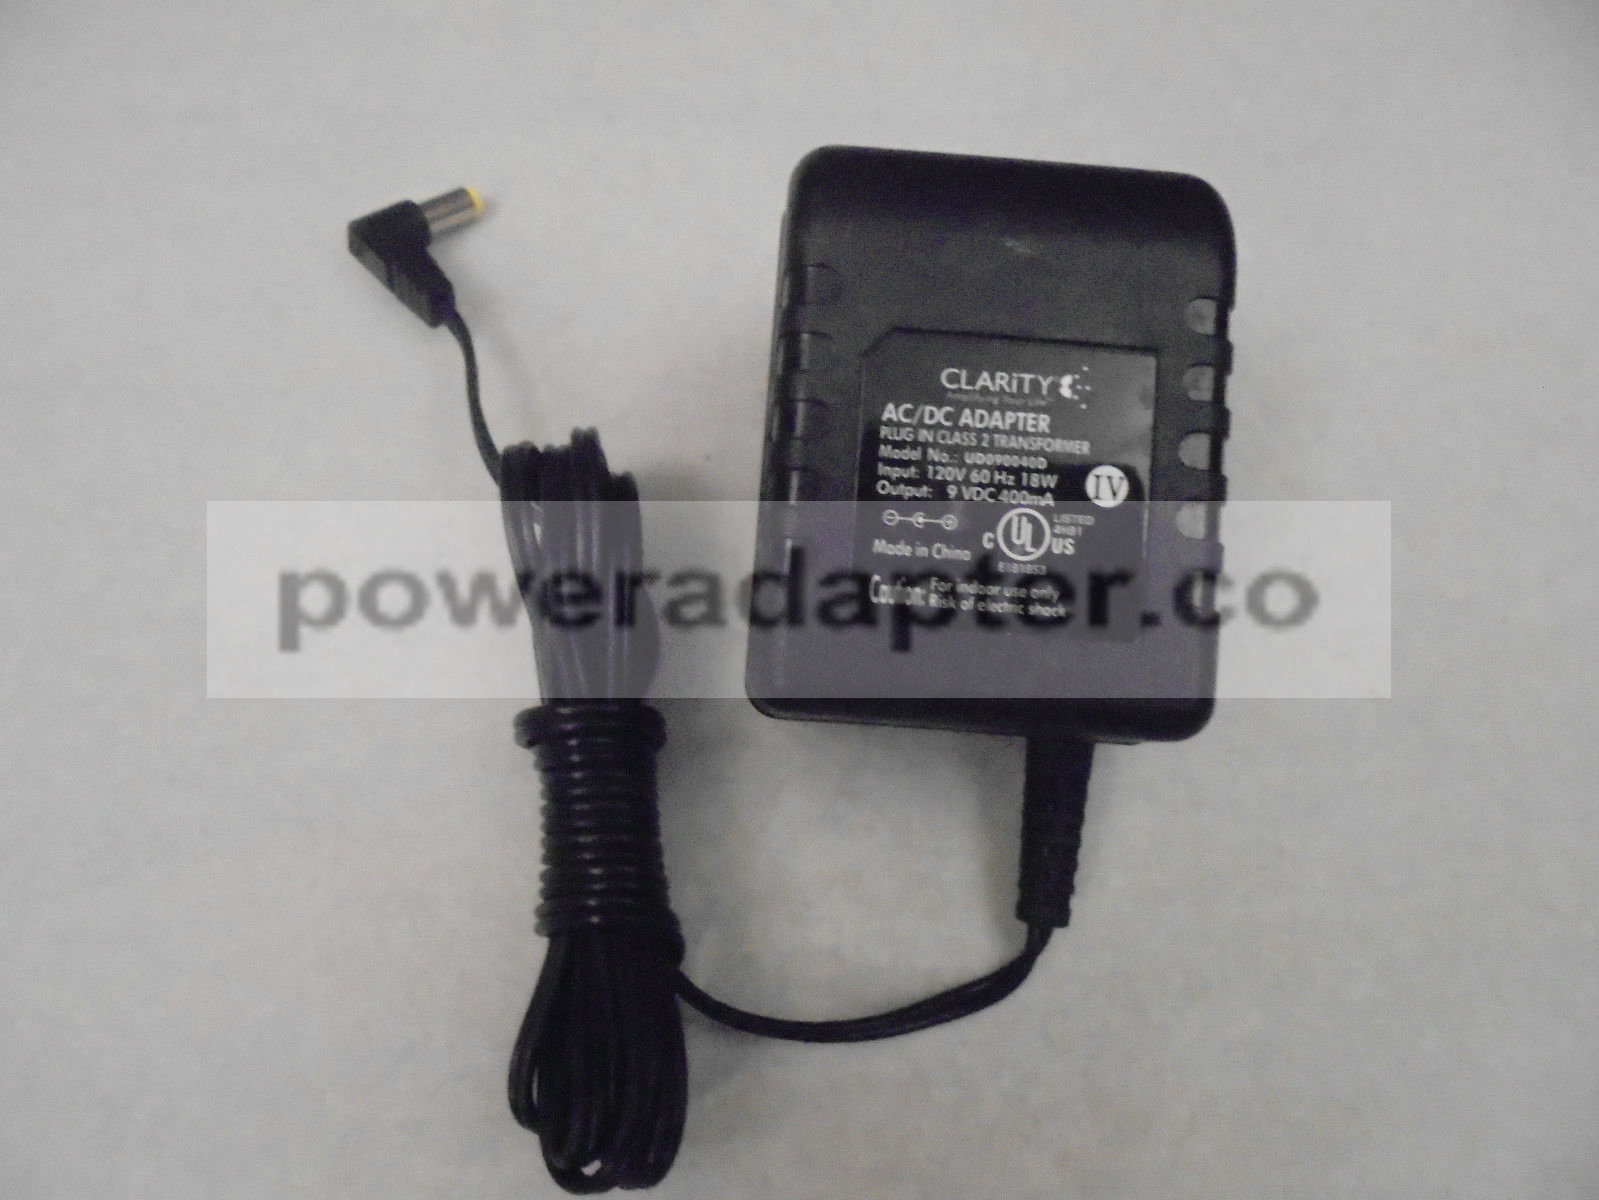 Clarity UD090040D 9 vdc 400mA POWER SUPPLY AC DC ADAPTER ORIGINAL Condition: Used: An item that has been used previou